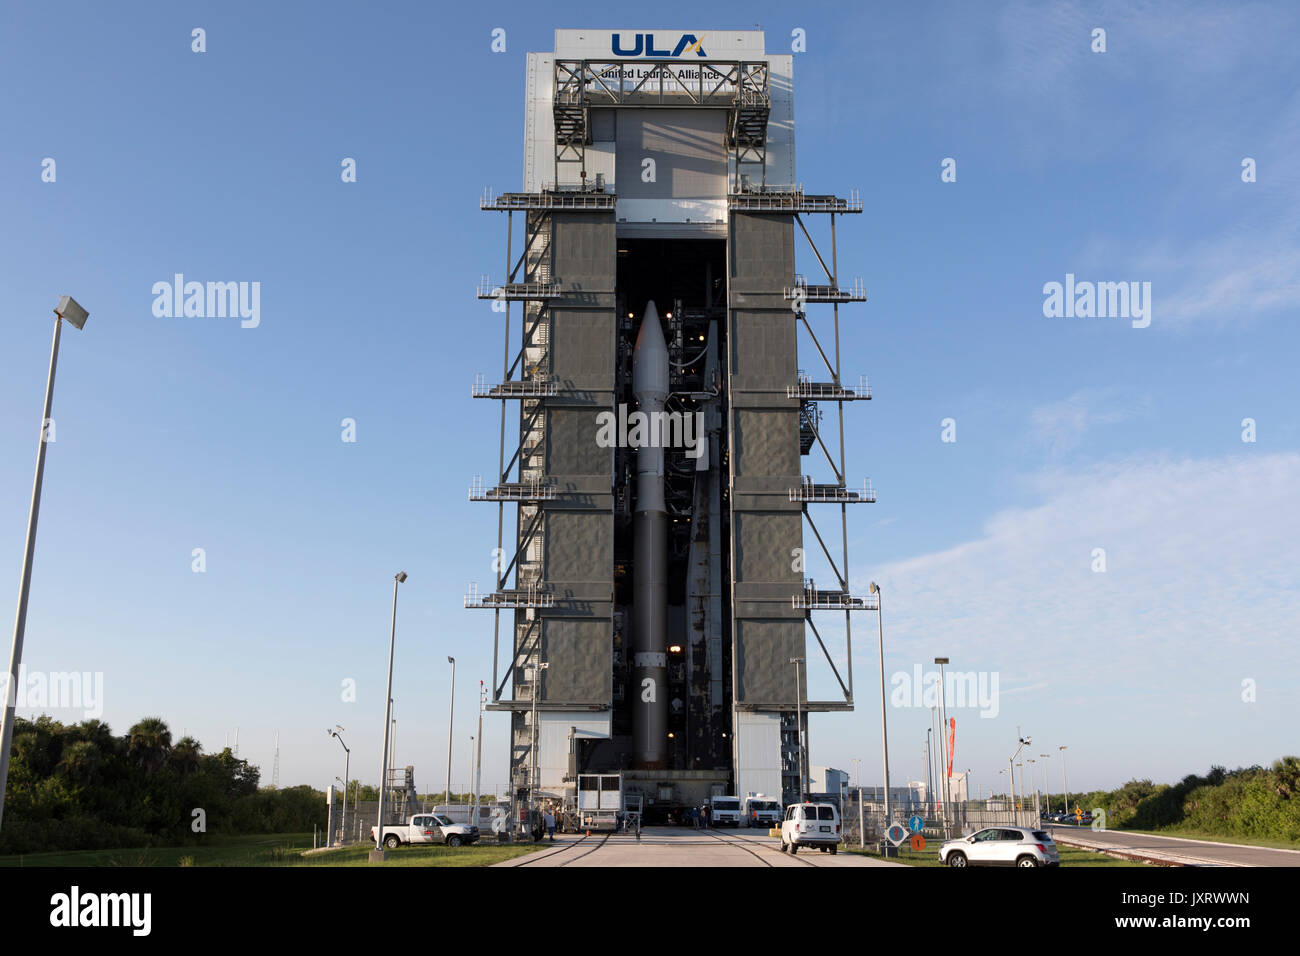 Cape Canaveral, United States Of America. 16th Aug, 2017. The United Launch Alliance Atlas V rocket is rolled out from the Vertical Integration Facility at Space Launch Complex 41 at Cape Canaveral Air Force Station August 16, 2017 in Cape Canaveral, Florida. The commercial rocket scheduled to send NASA's Tracking and Data Relay Satellite, TDRS-M to orbit on August 18th. Credit: Planetpix/Alamy Live News Stock Photo